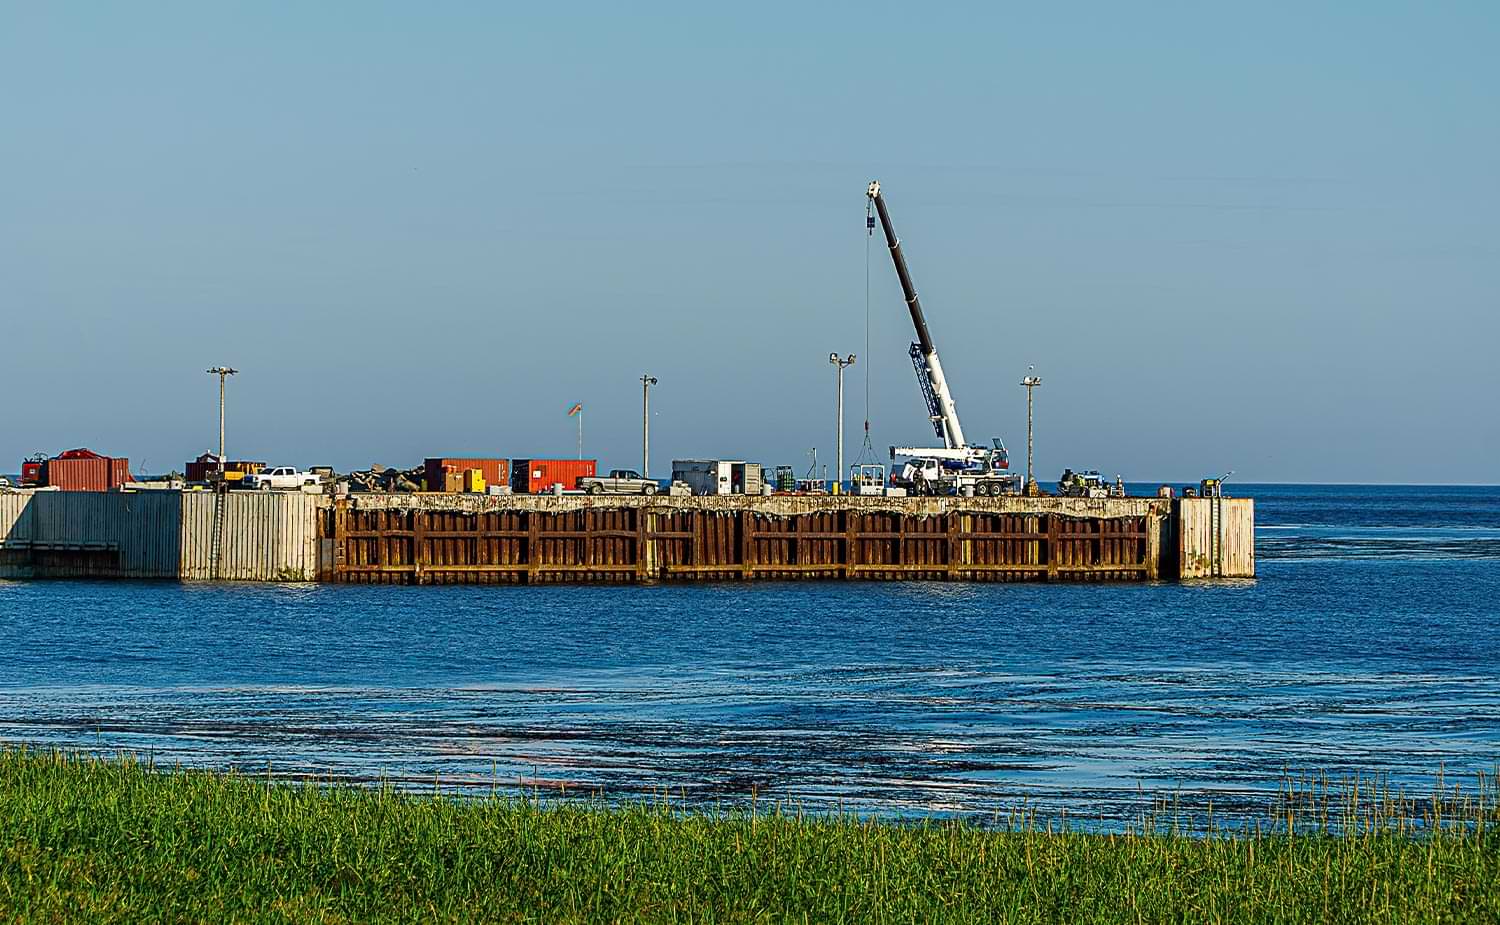 distant view of construction work taking place on the Eareckson Air Station's fuel pier